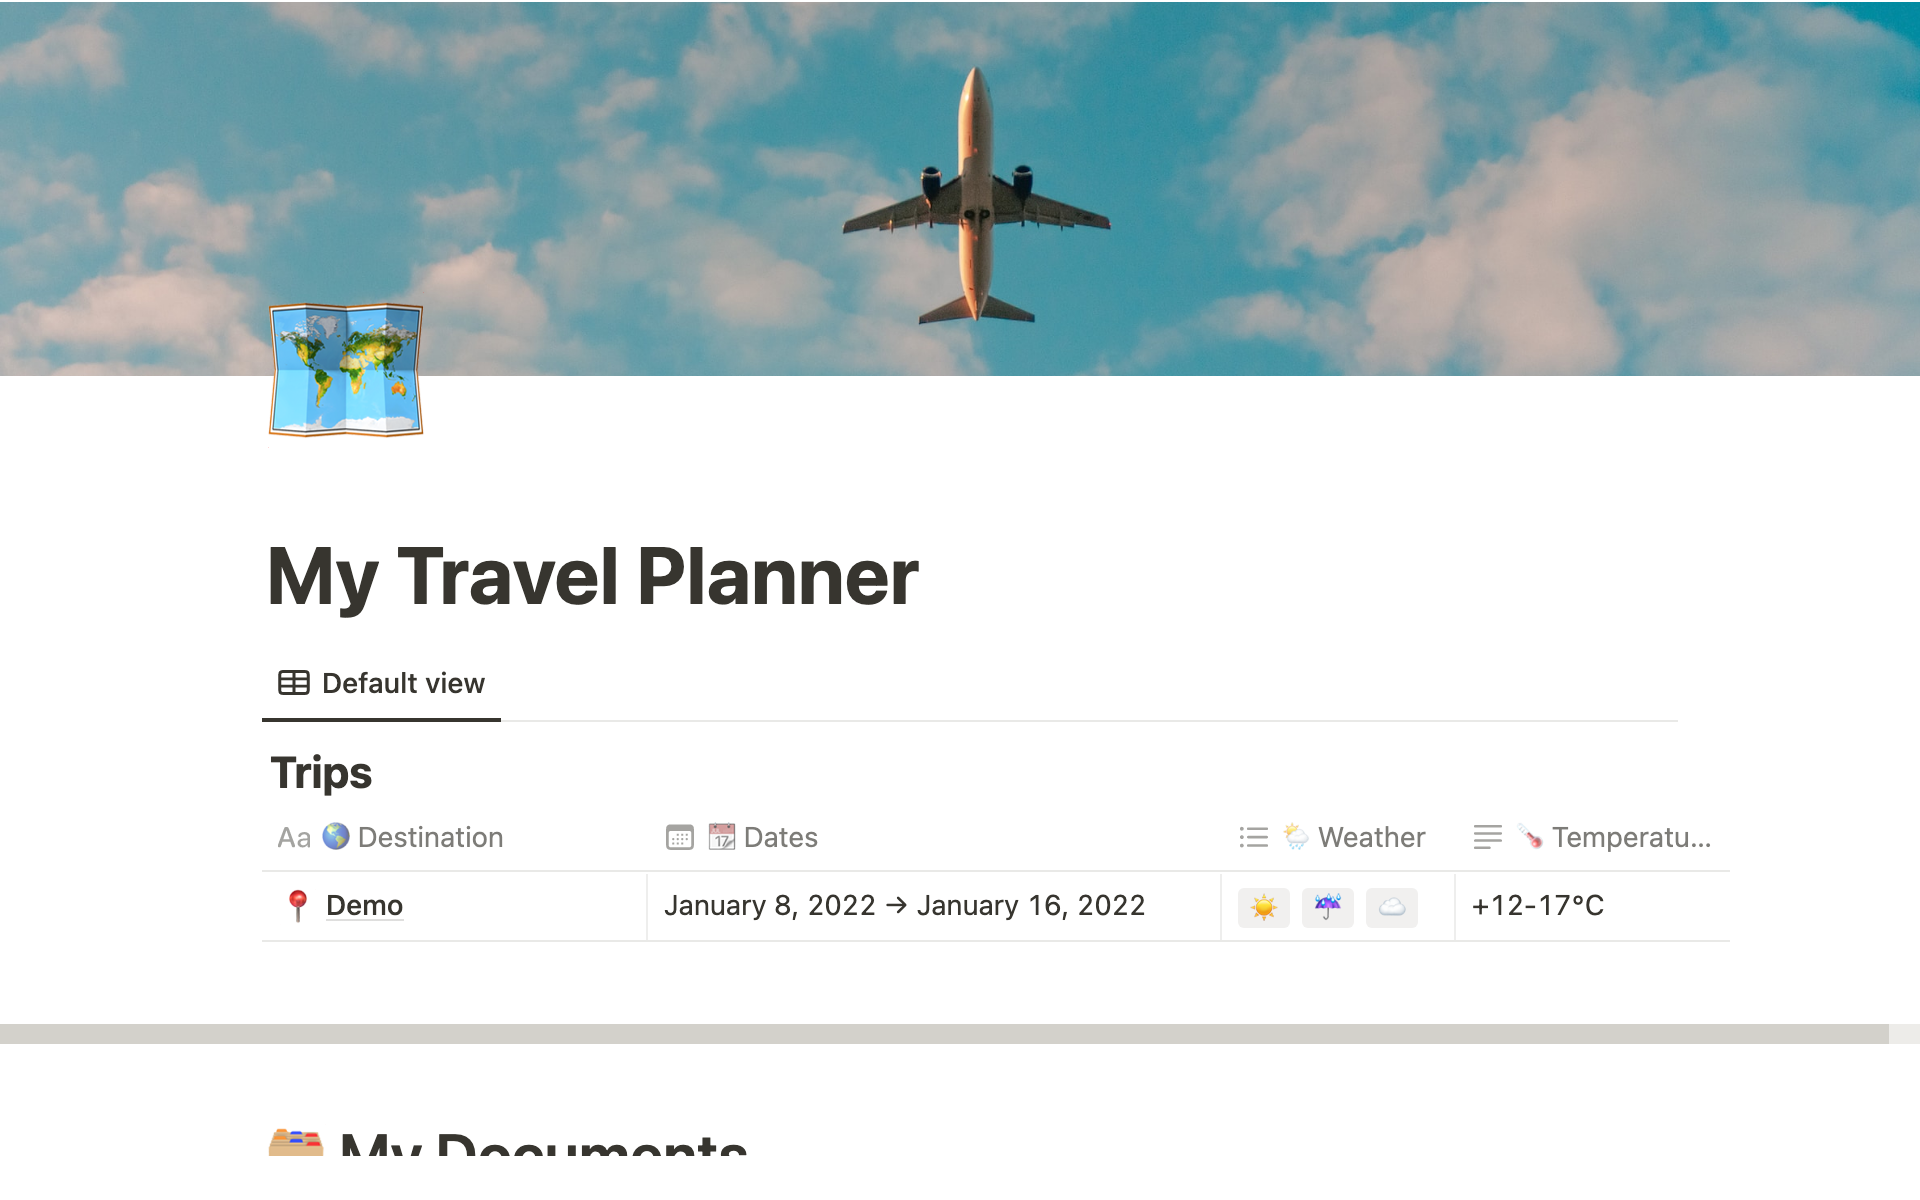 Travel planner and packing checklist for all kinds of trips